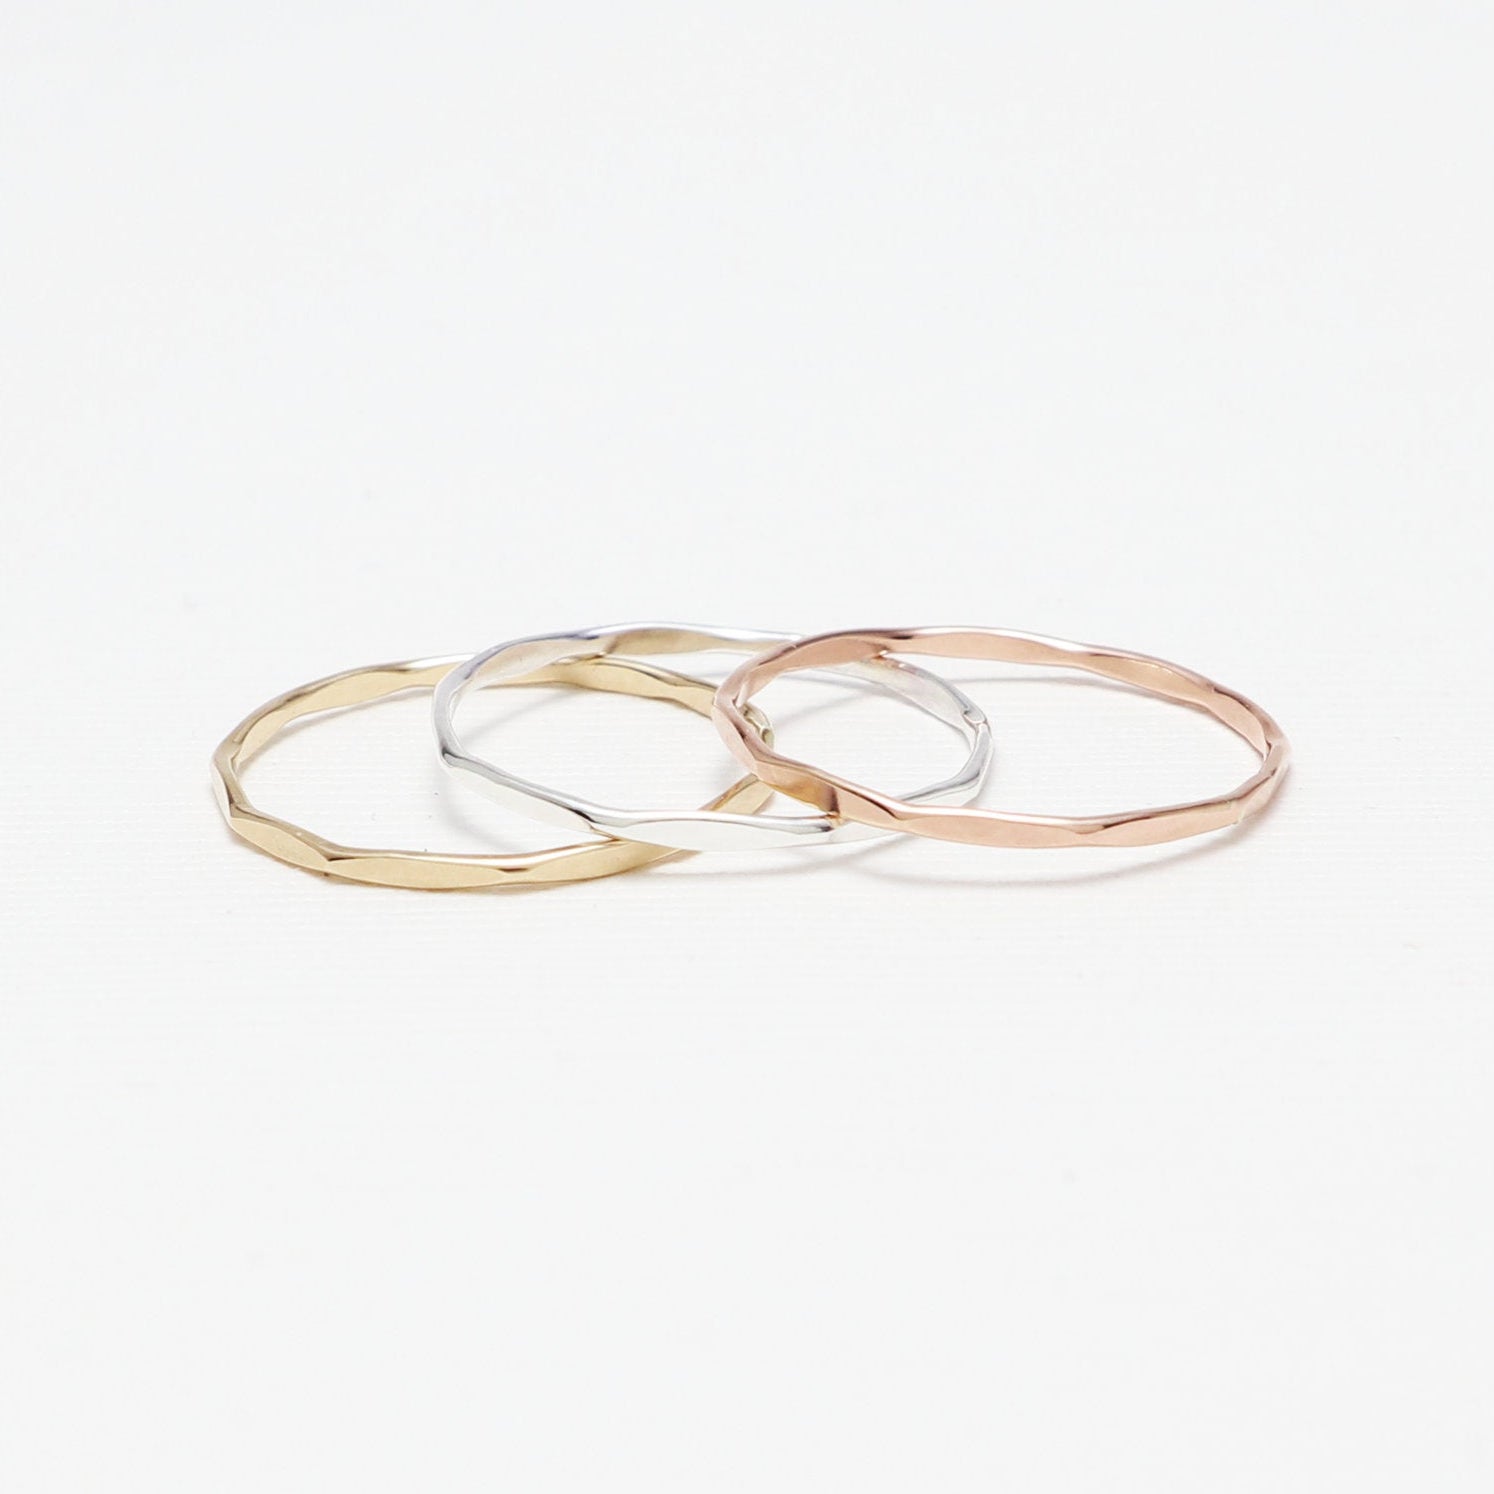 The 3 Solace Rings